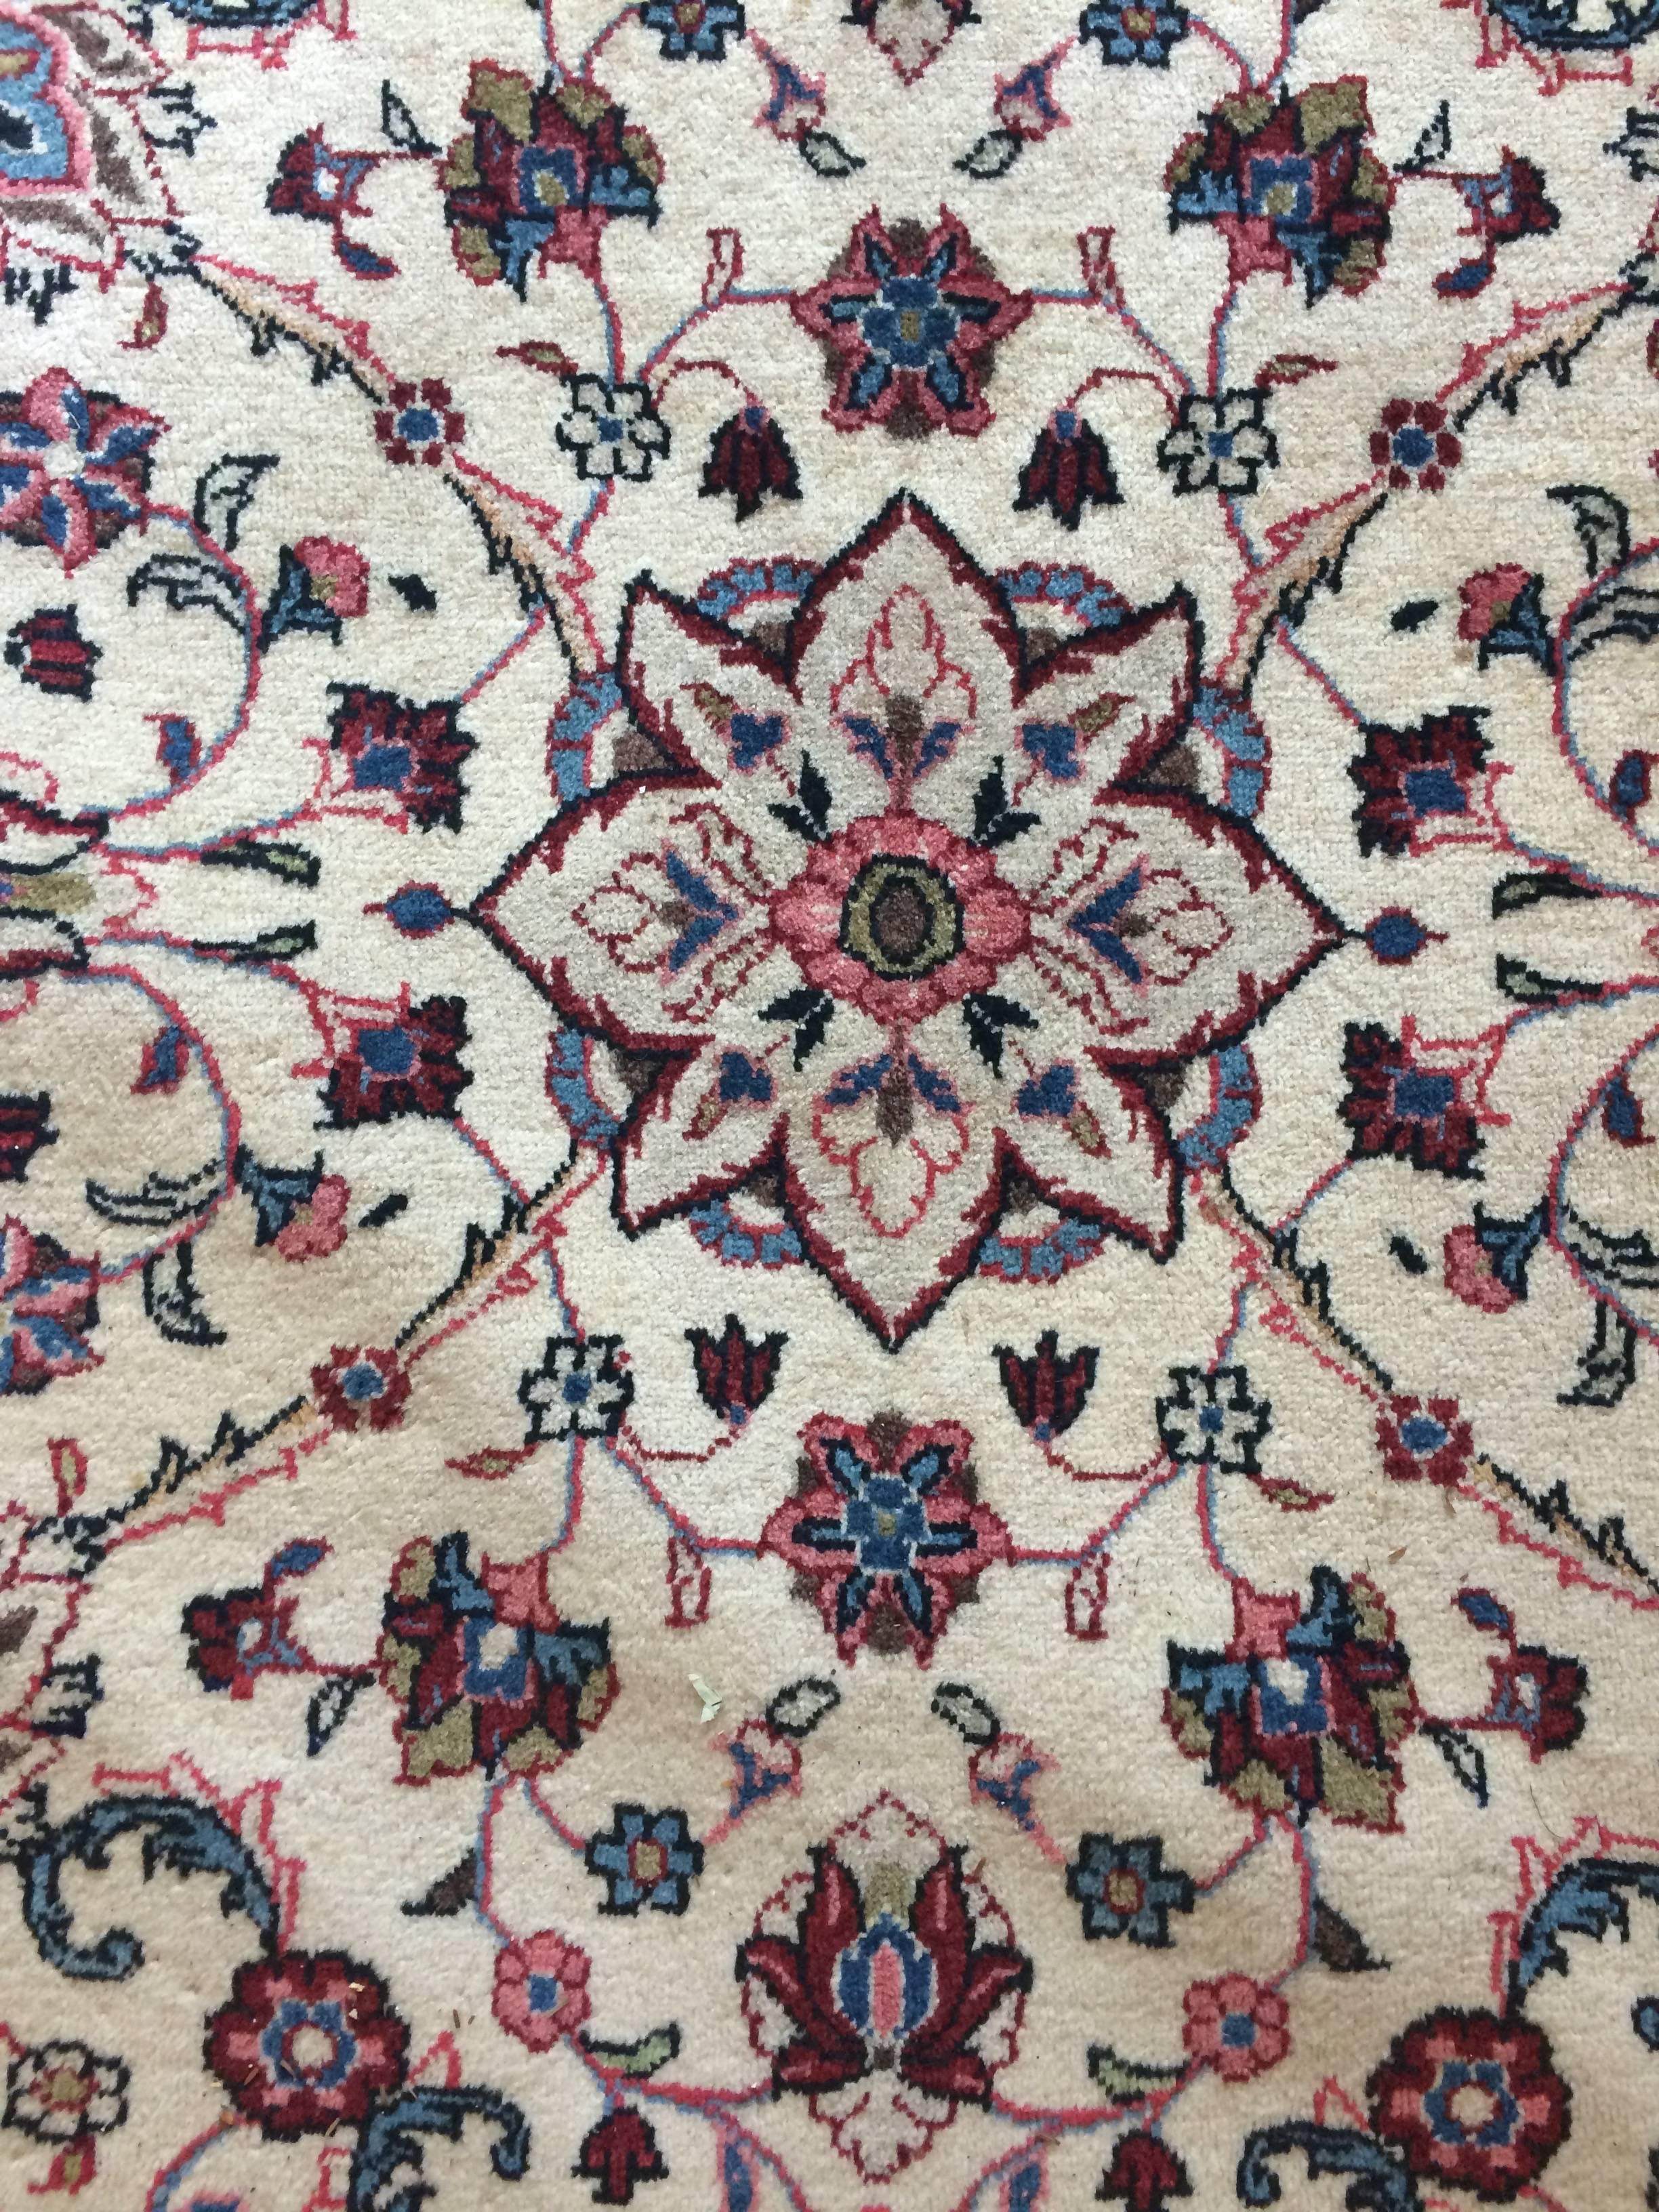 Late 20th Century Sumptuous Large Isfahan Pakistani Rug in Jewel Tones